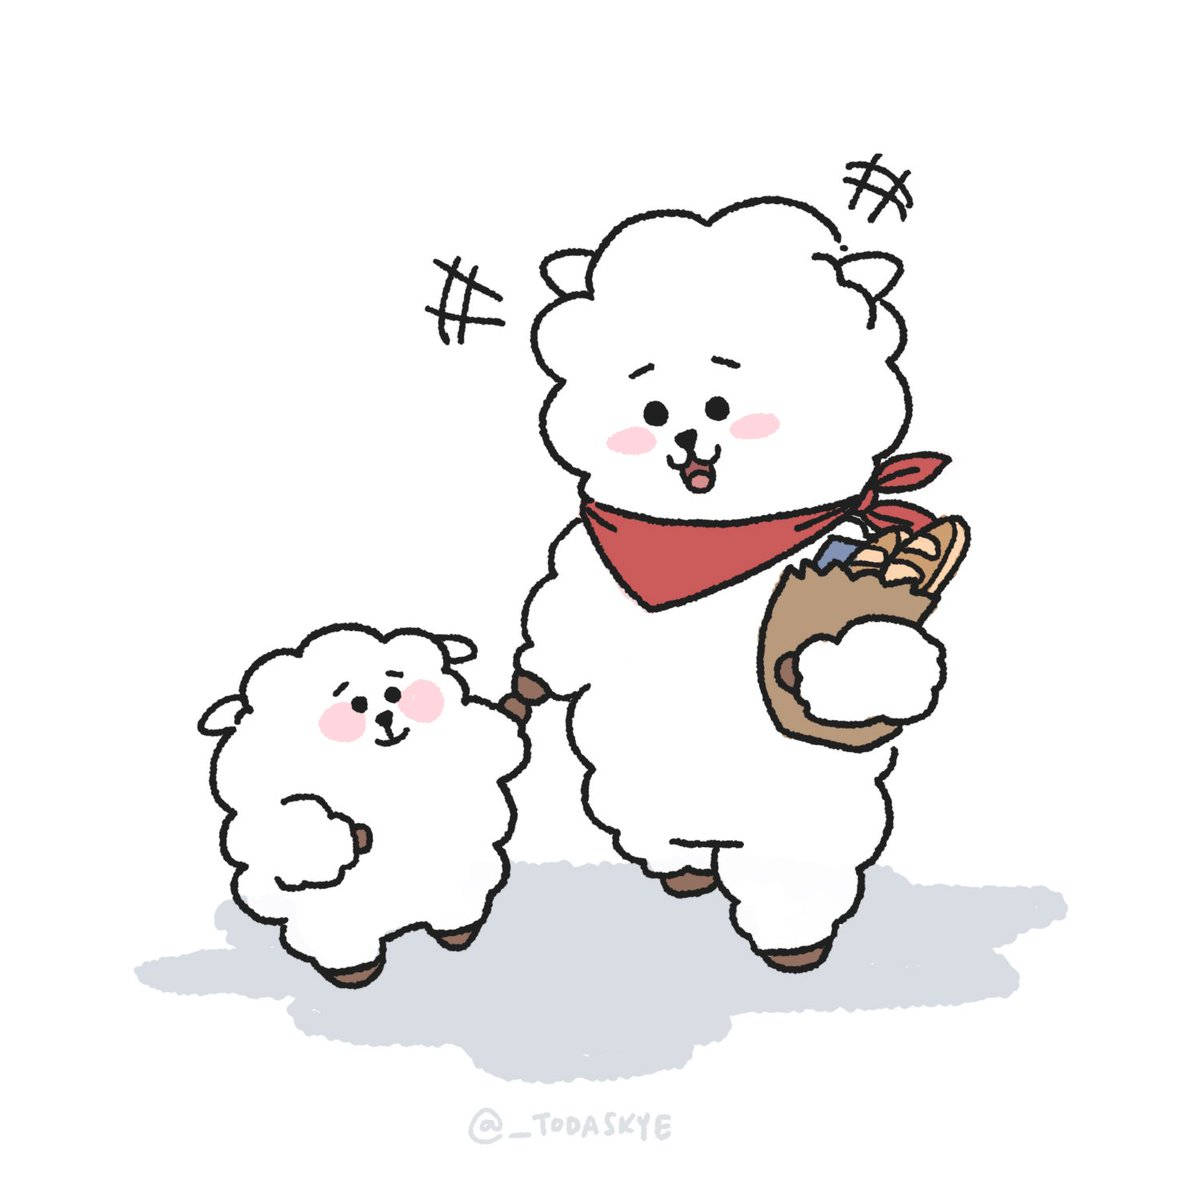 Rk And Rj Bt21 Background